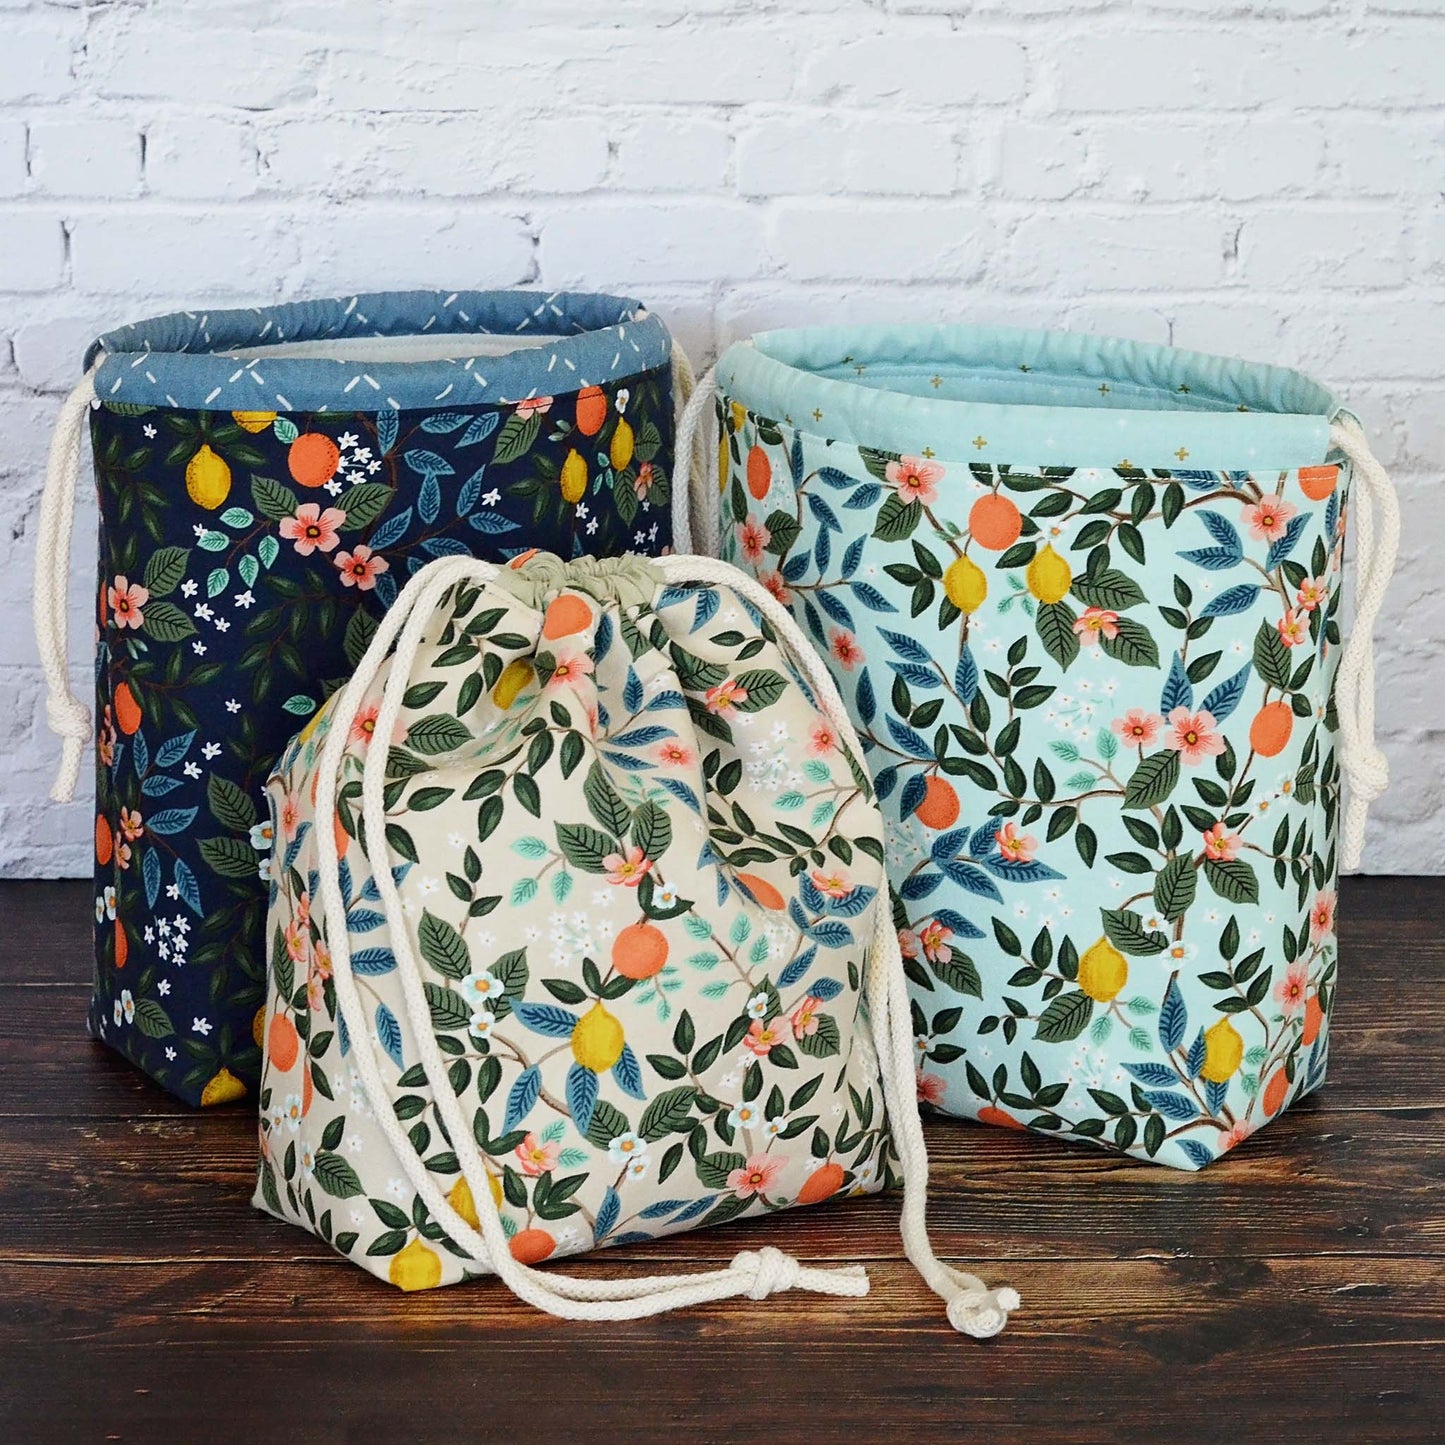 Collection of Knitting Bags in Rifle Paper Co Bramble Fabric with citrus and floral print.  Made in Canada by Yellow Petal Handmade.